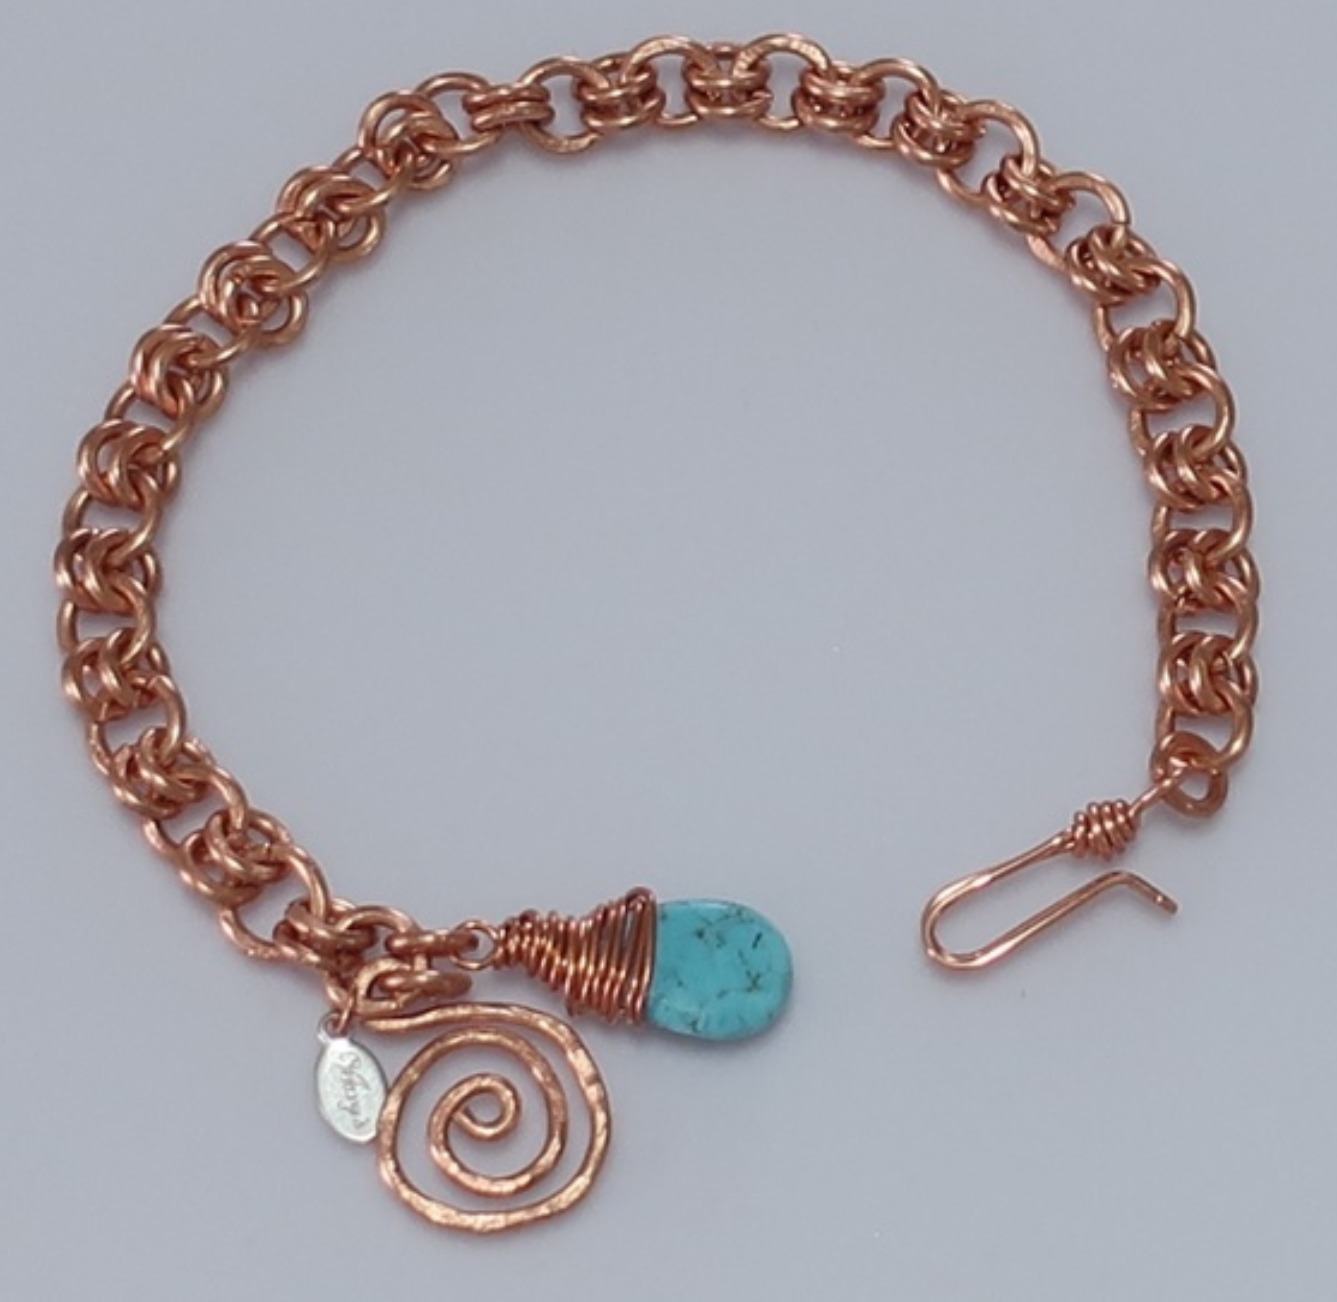 (216  - BCT) - Description: Handcrafted Bracelet, Copper Wire, Turquoise Howlite Gemstone, Hook Closure - Dimension: Adjustable up to 8 ' L (Inches